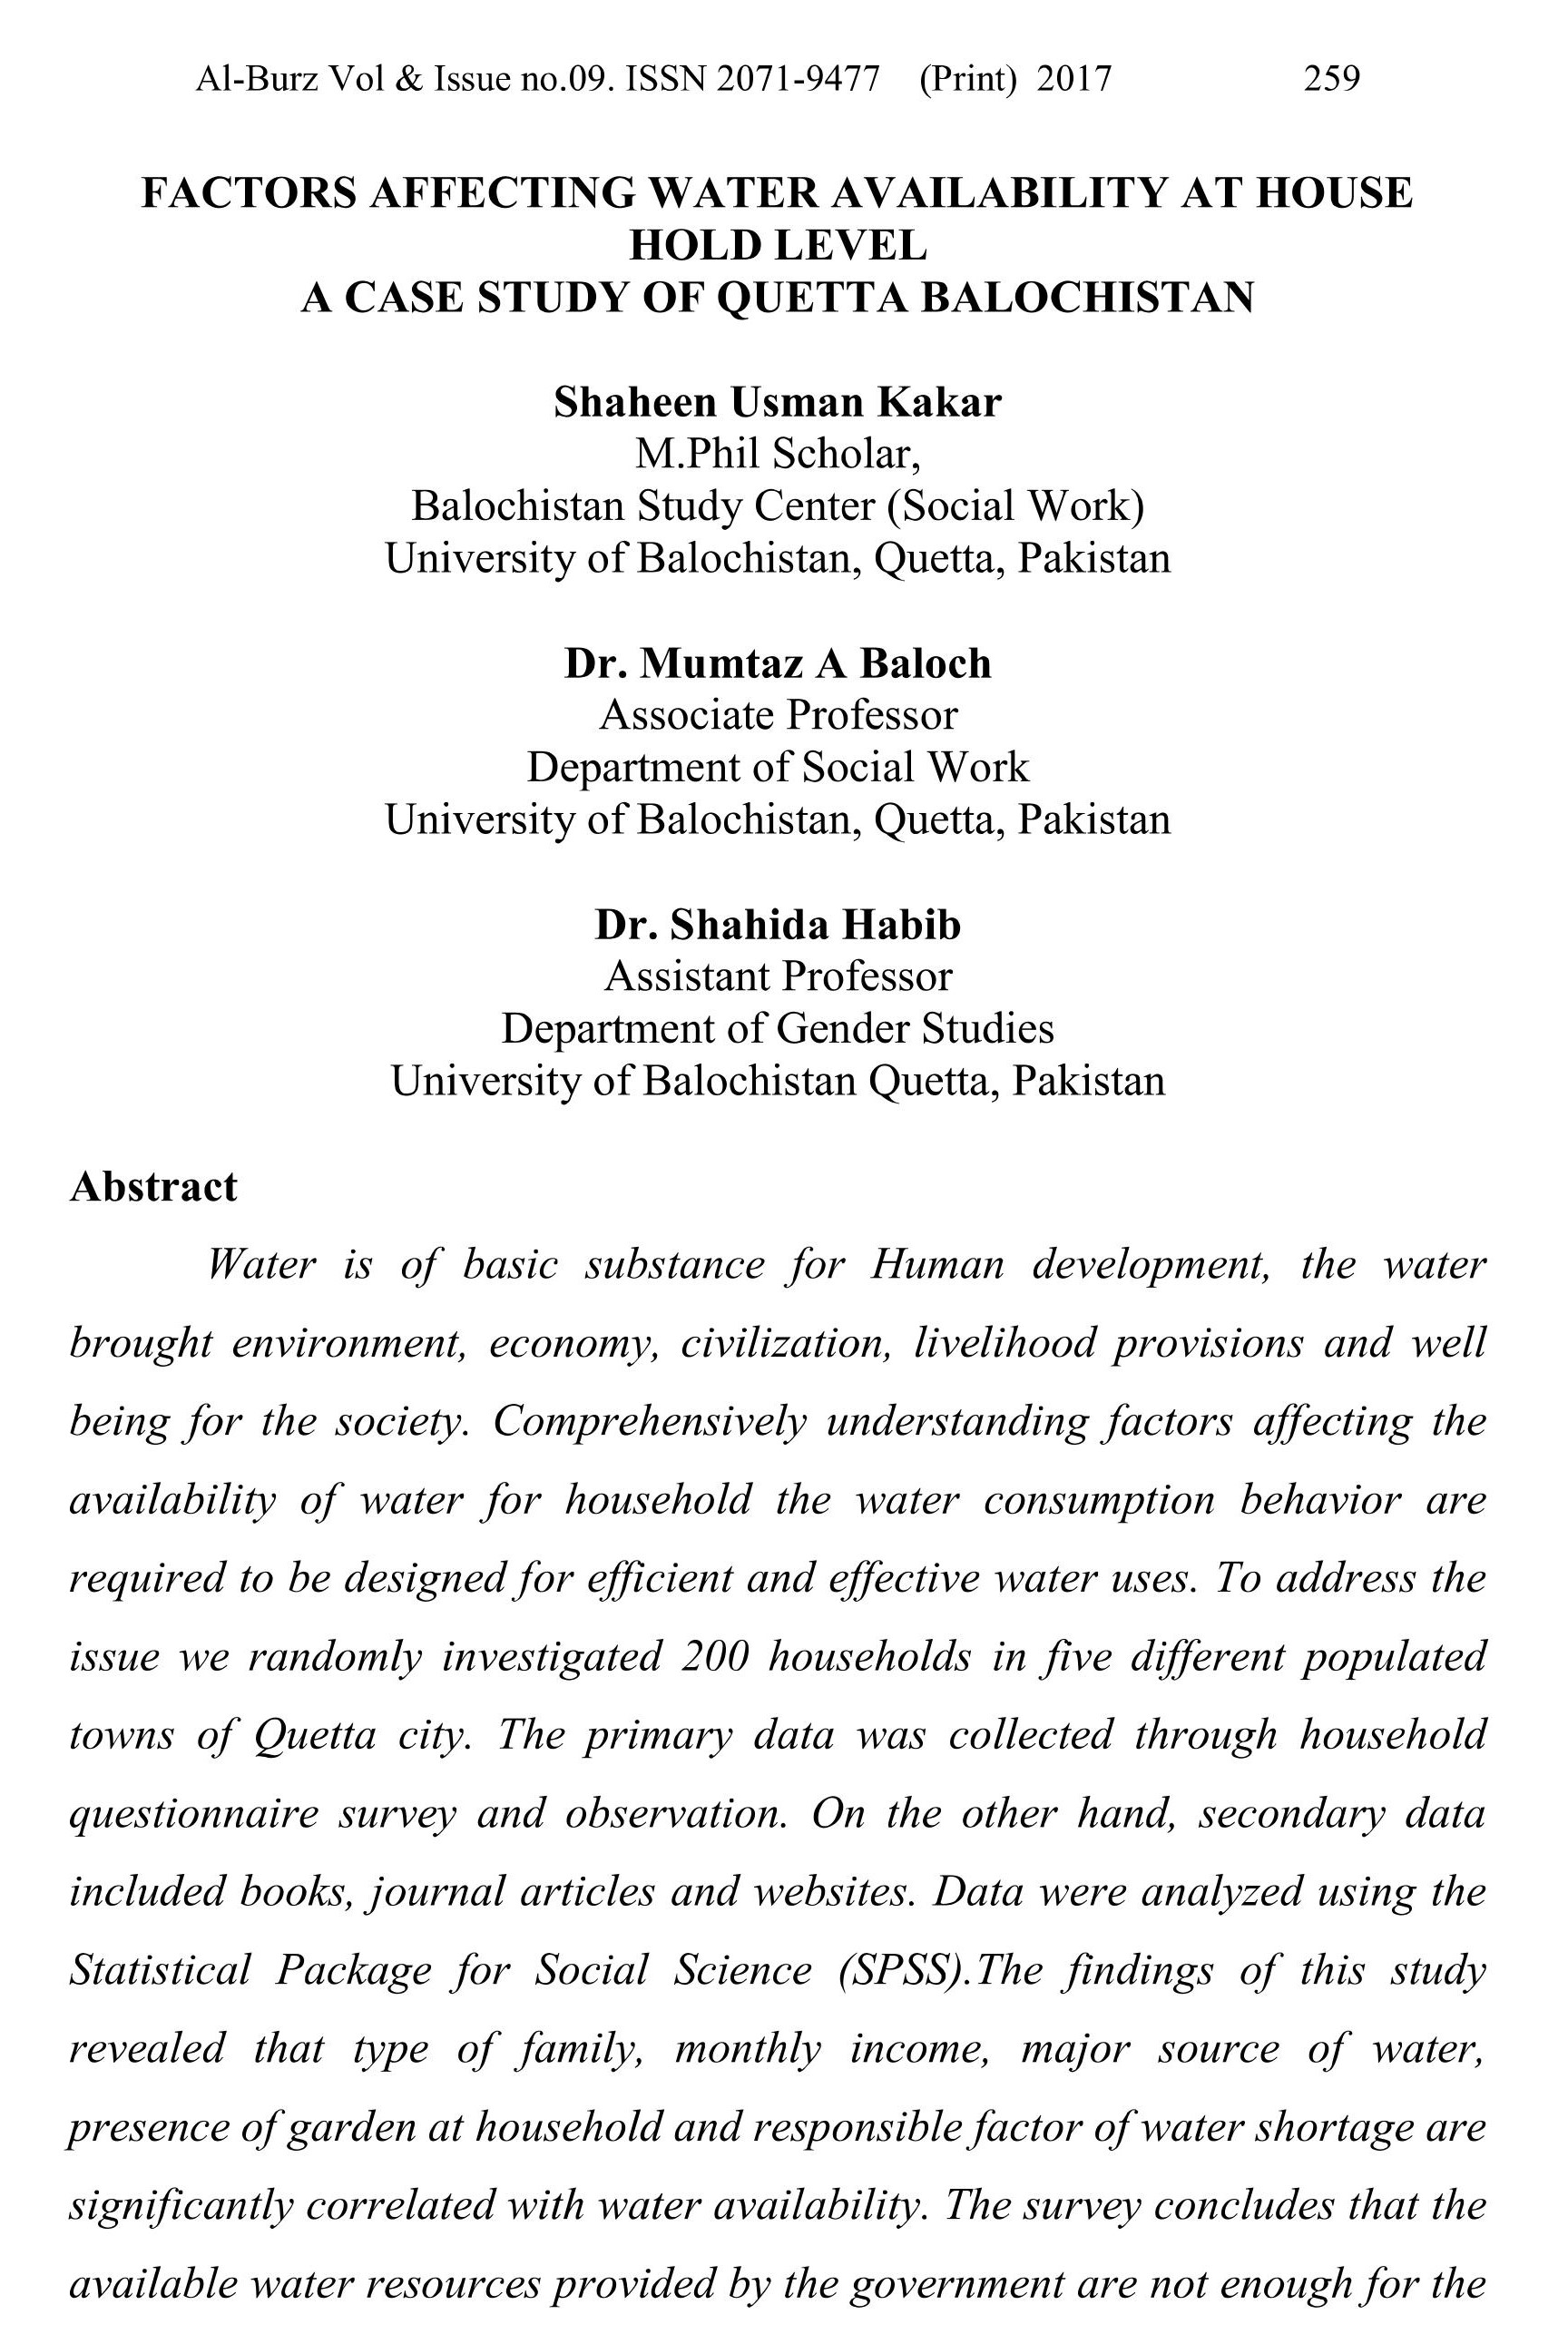 FACTORS AFFECTING WATER AVAILABILITY AT HOUSE HOLD LEVEL A CASE STUDY OF QUETTA BALOCHISTAN